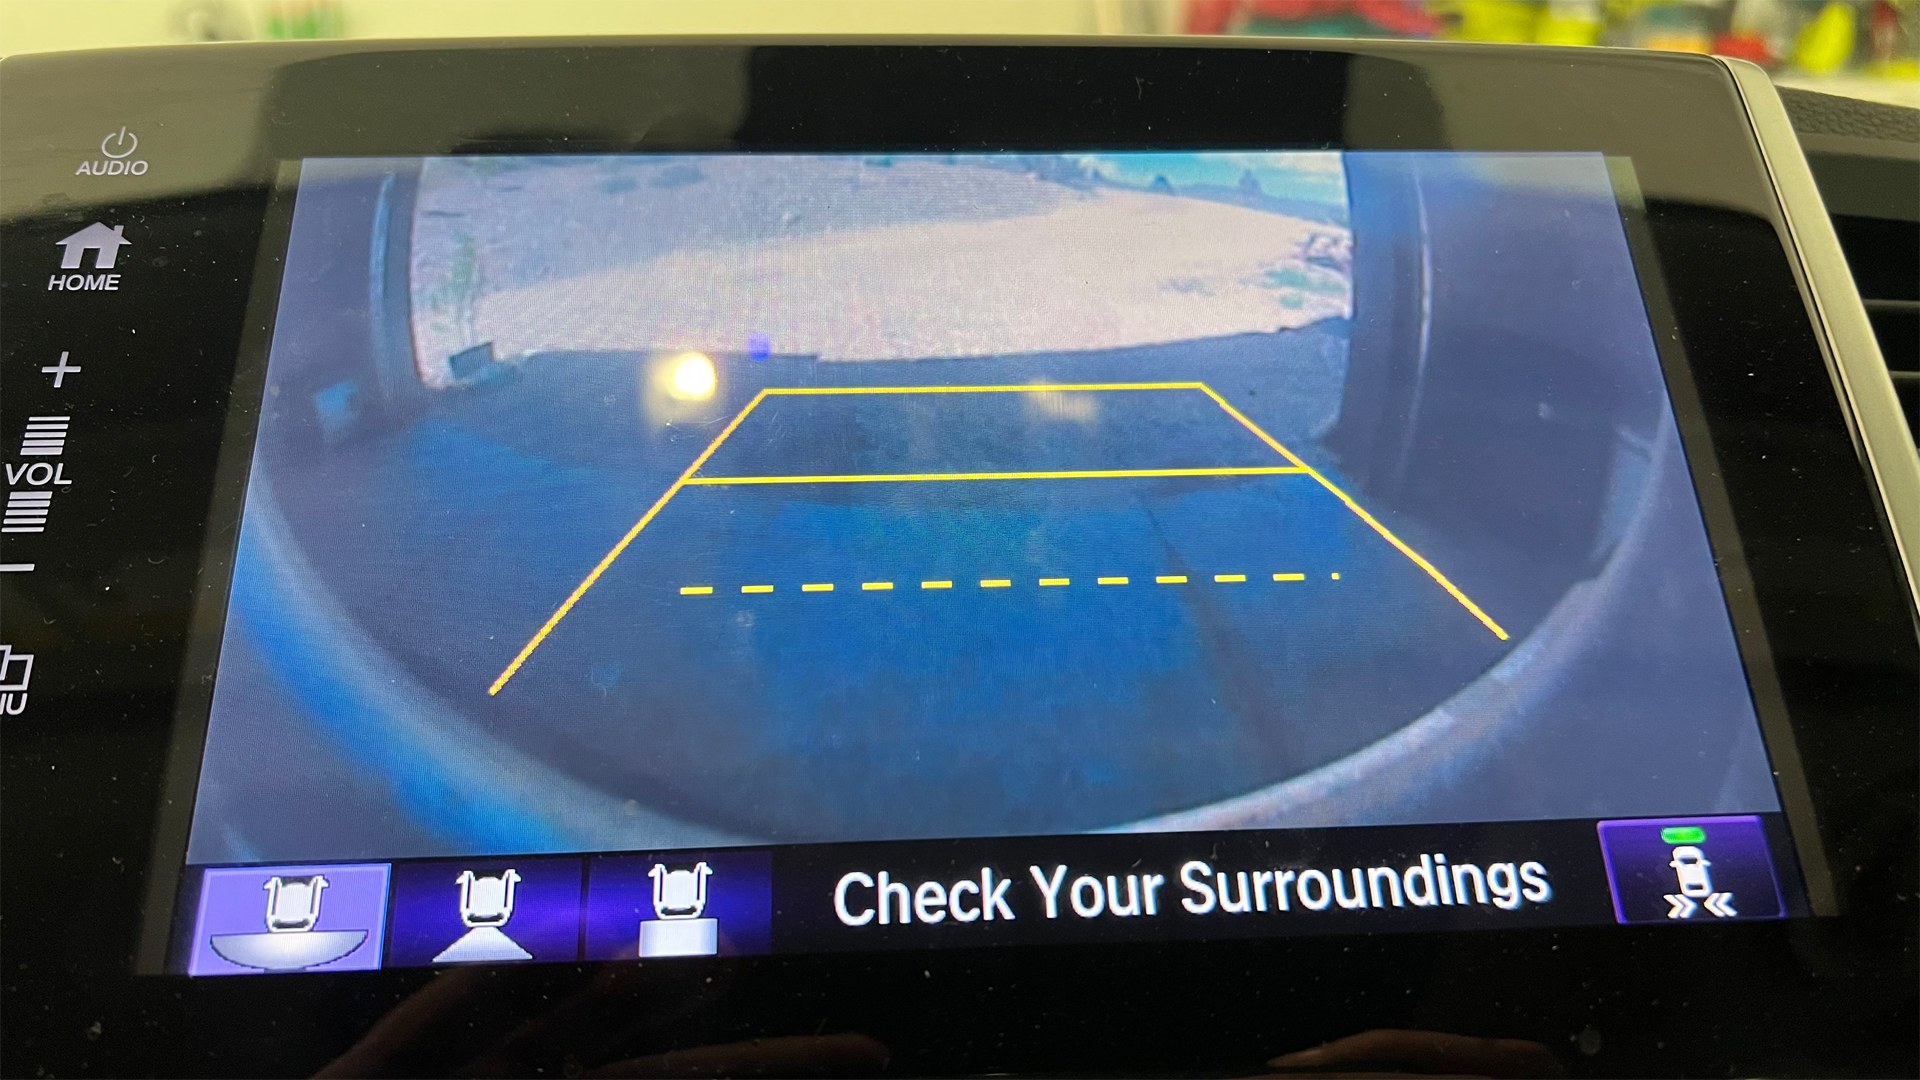 Best Backup Cameras: Your Rear Bumper Thanks You